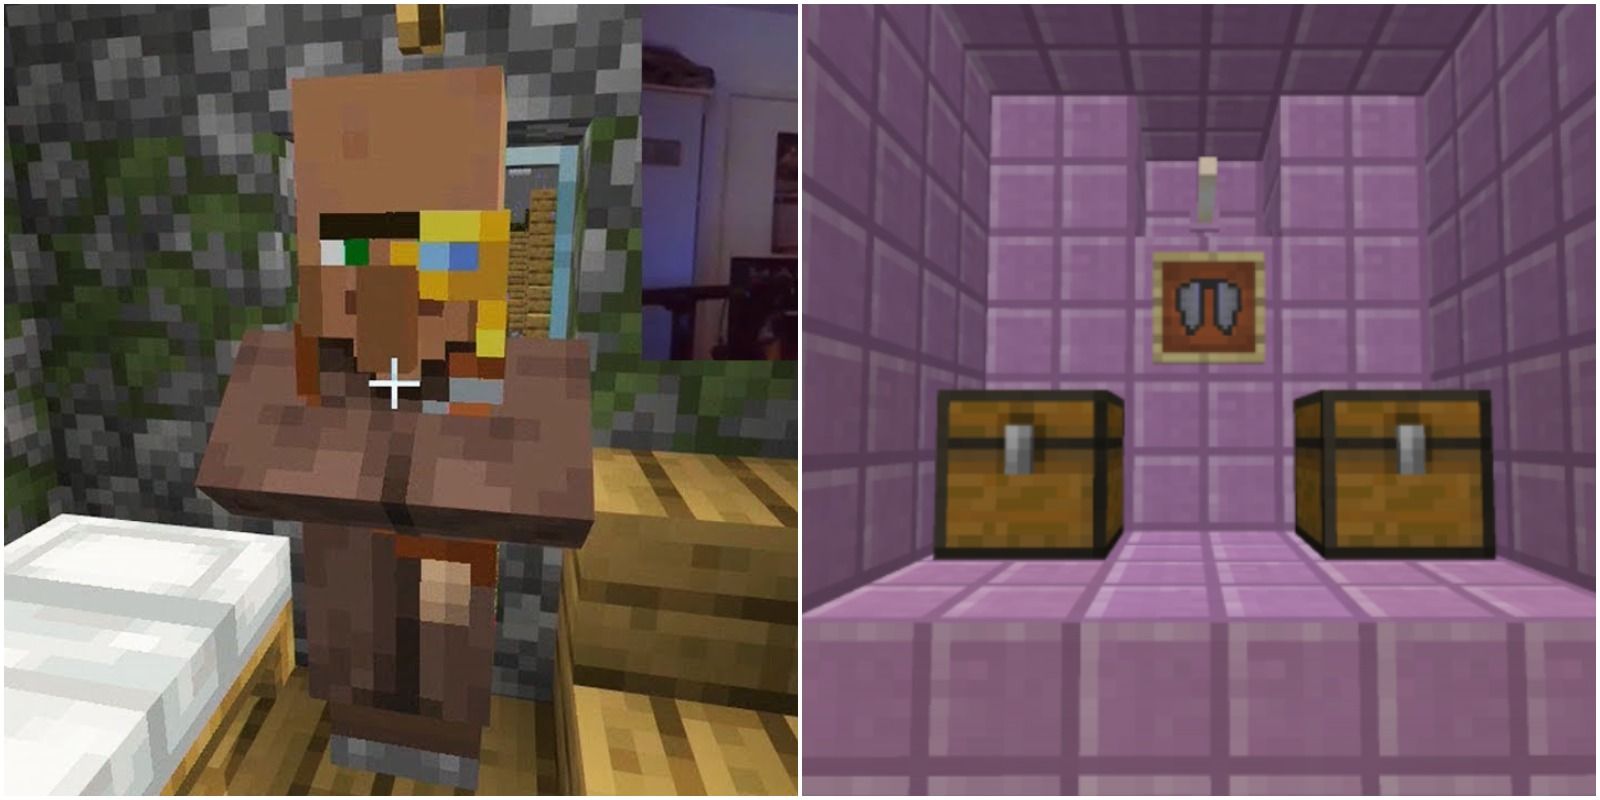 villager with a monocle and the inside of a purple end ship with chests.